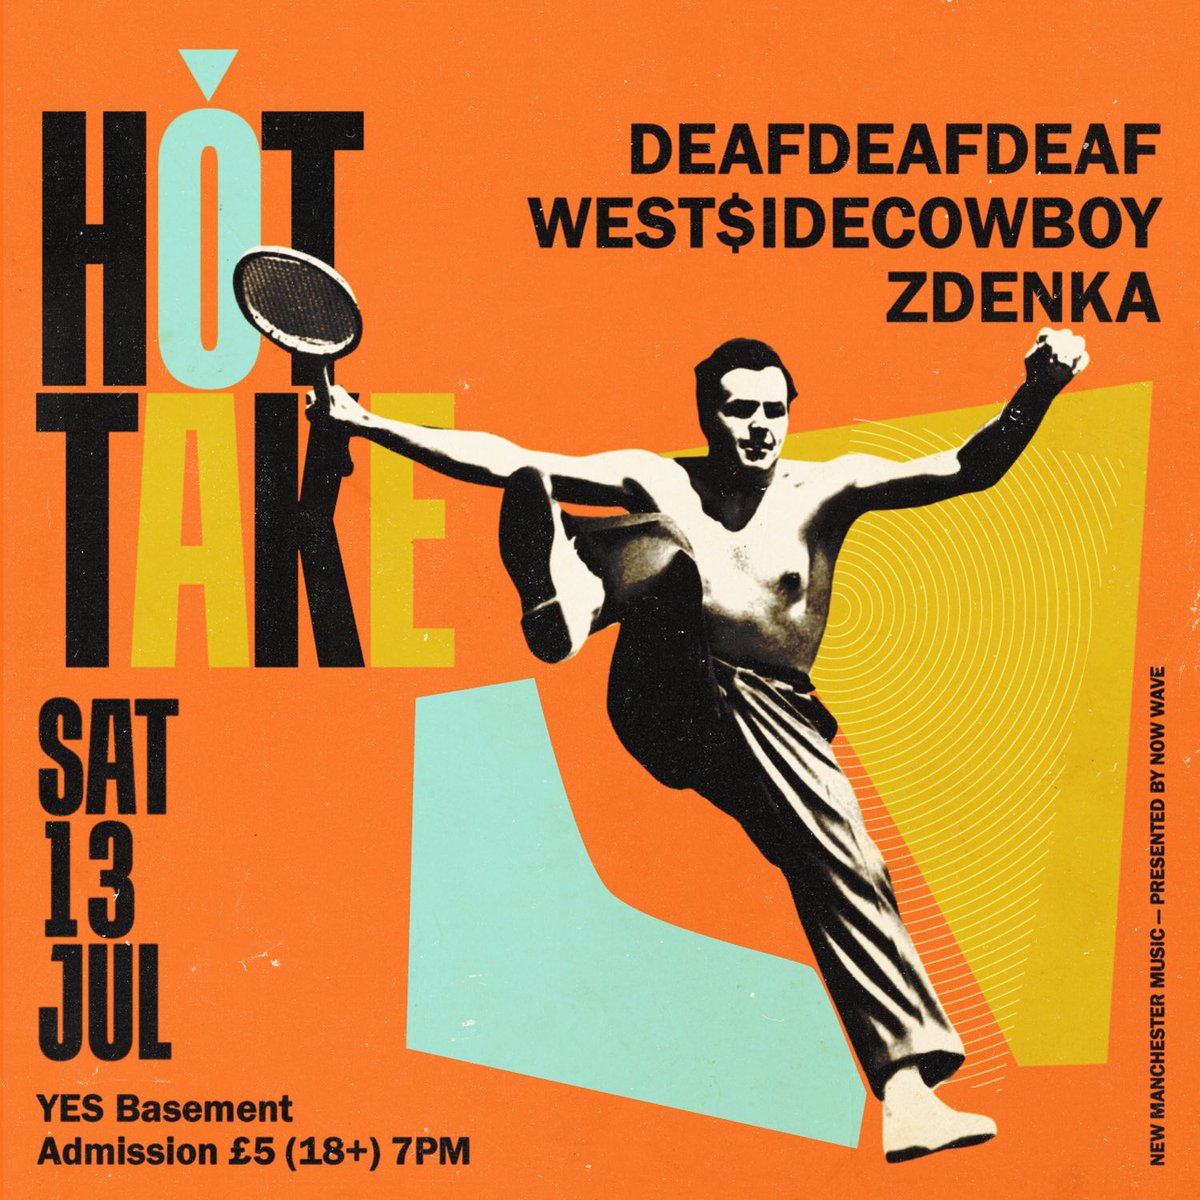 HOT TAKE MCR 🔥 Playing the hottest show in town with @westsidecowboyyy & @zdenka______ Tickets on sale Friday 💥 @yes_mcr @nowwave @hot_take_mcr